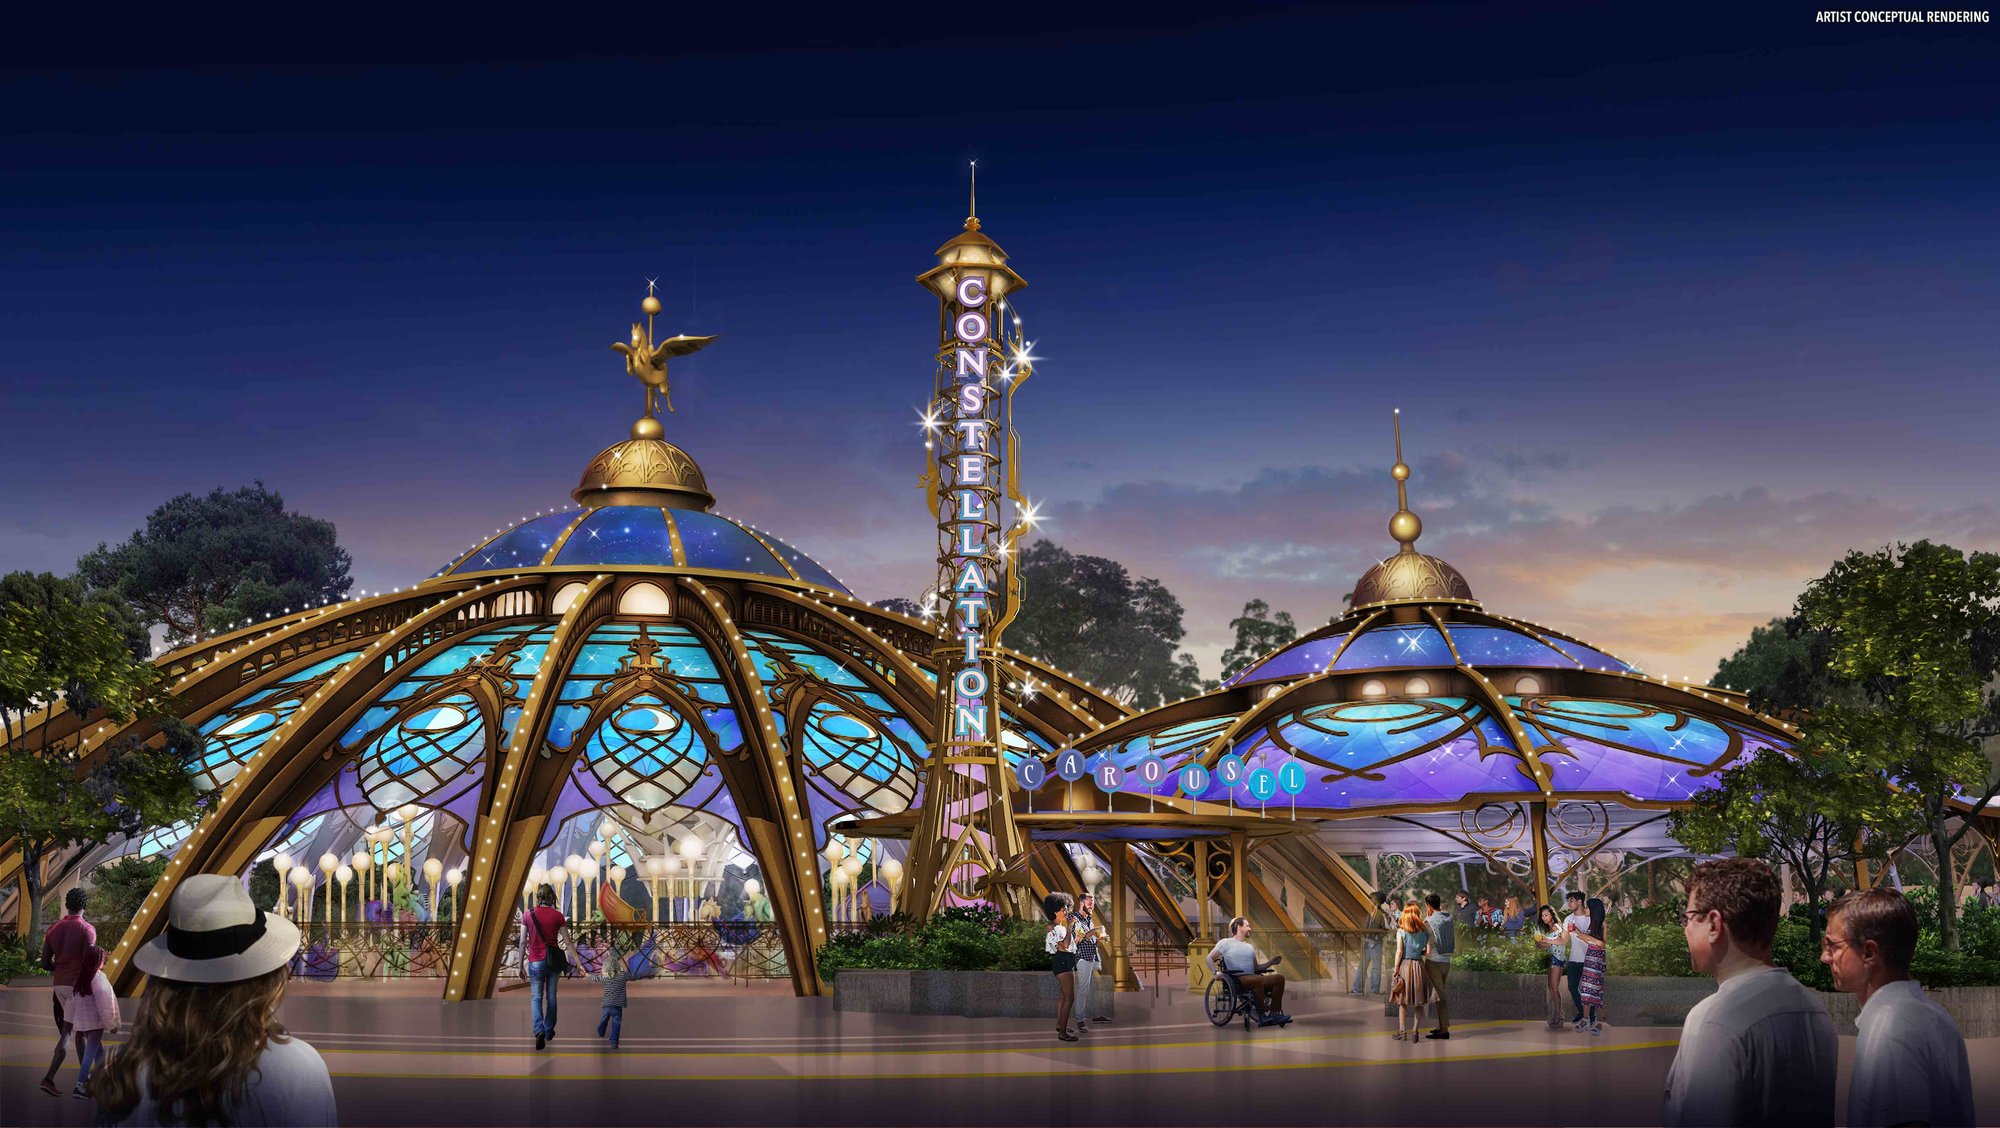 concept art of constellation carousel lit up with cool colors